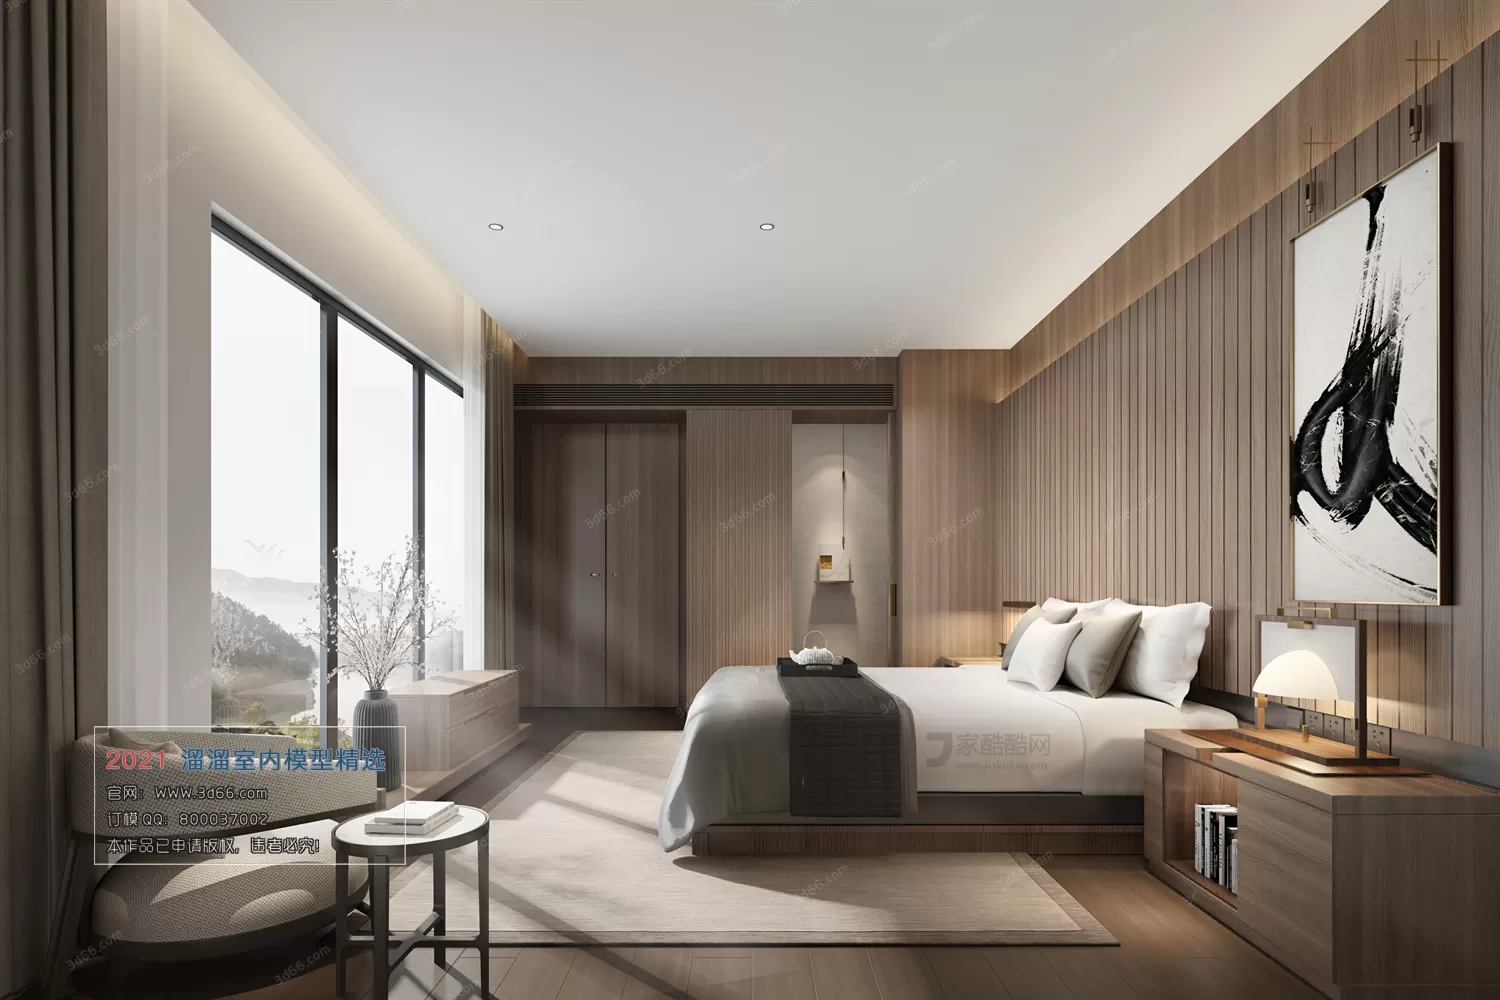 HOTEL SUITE – C001-Chinese style-Vray model